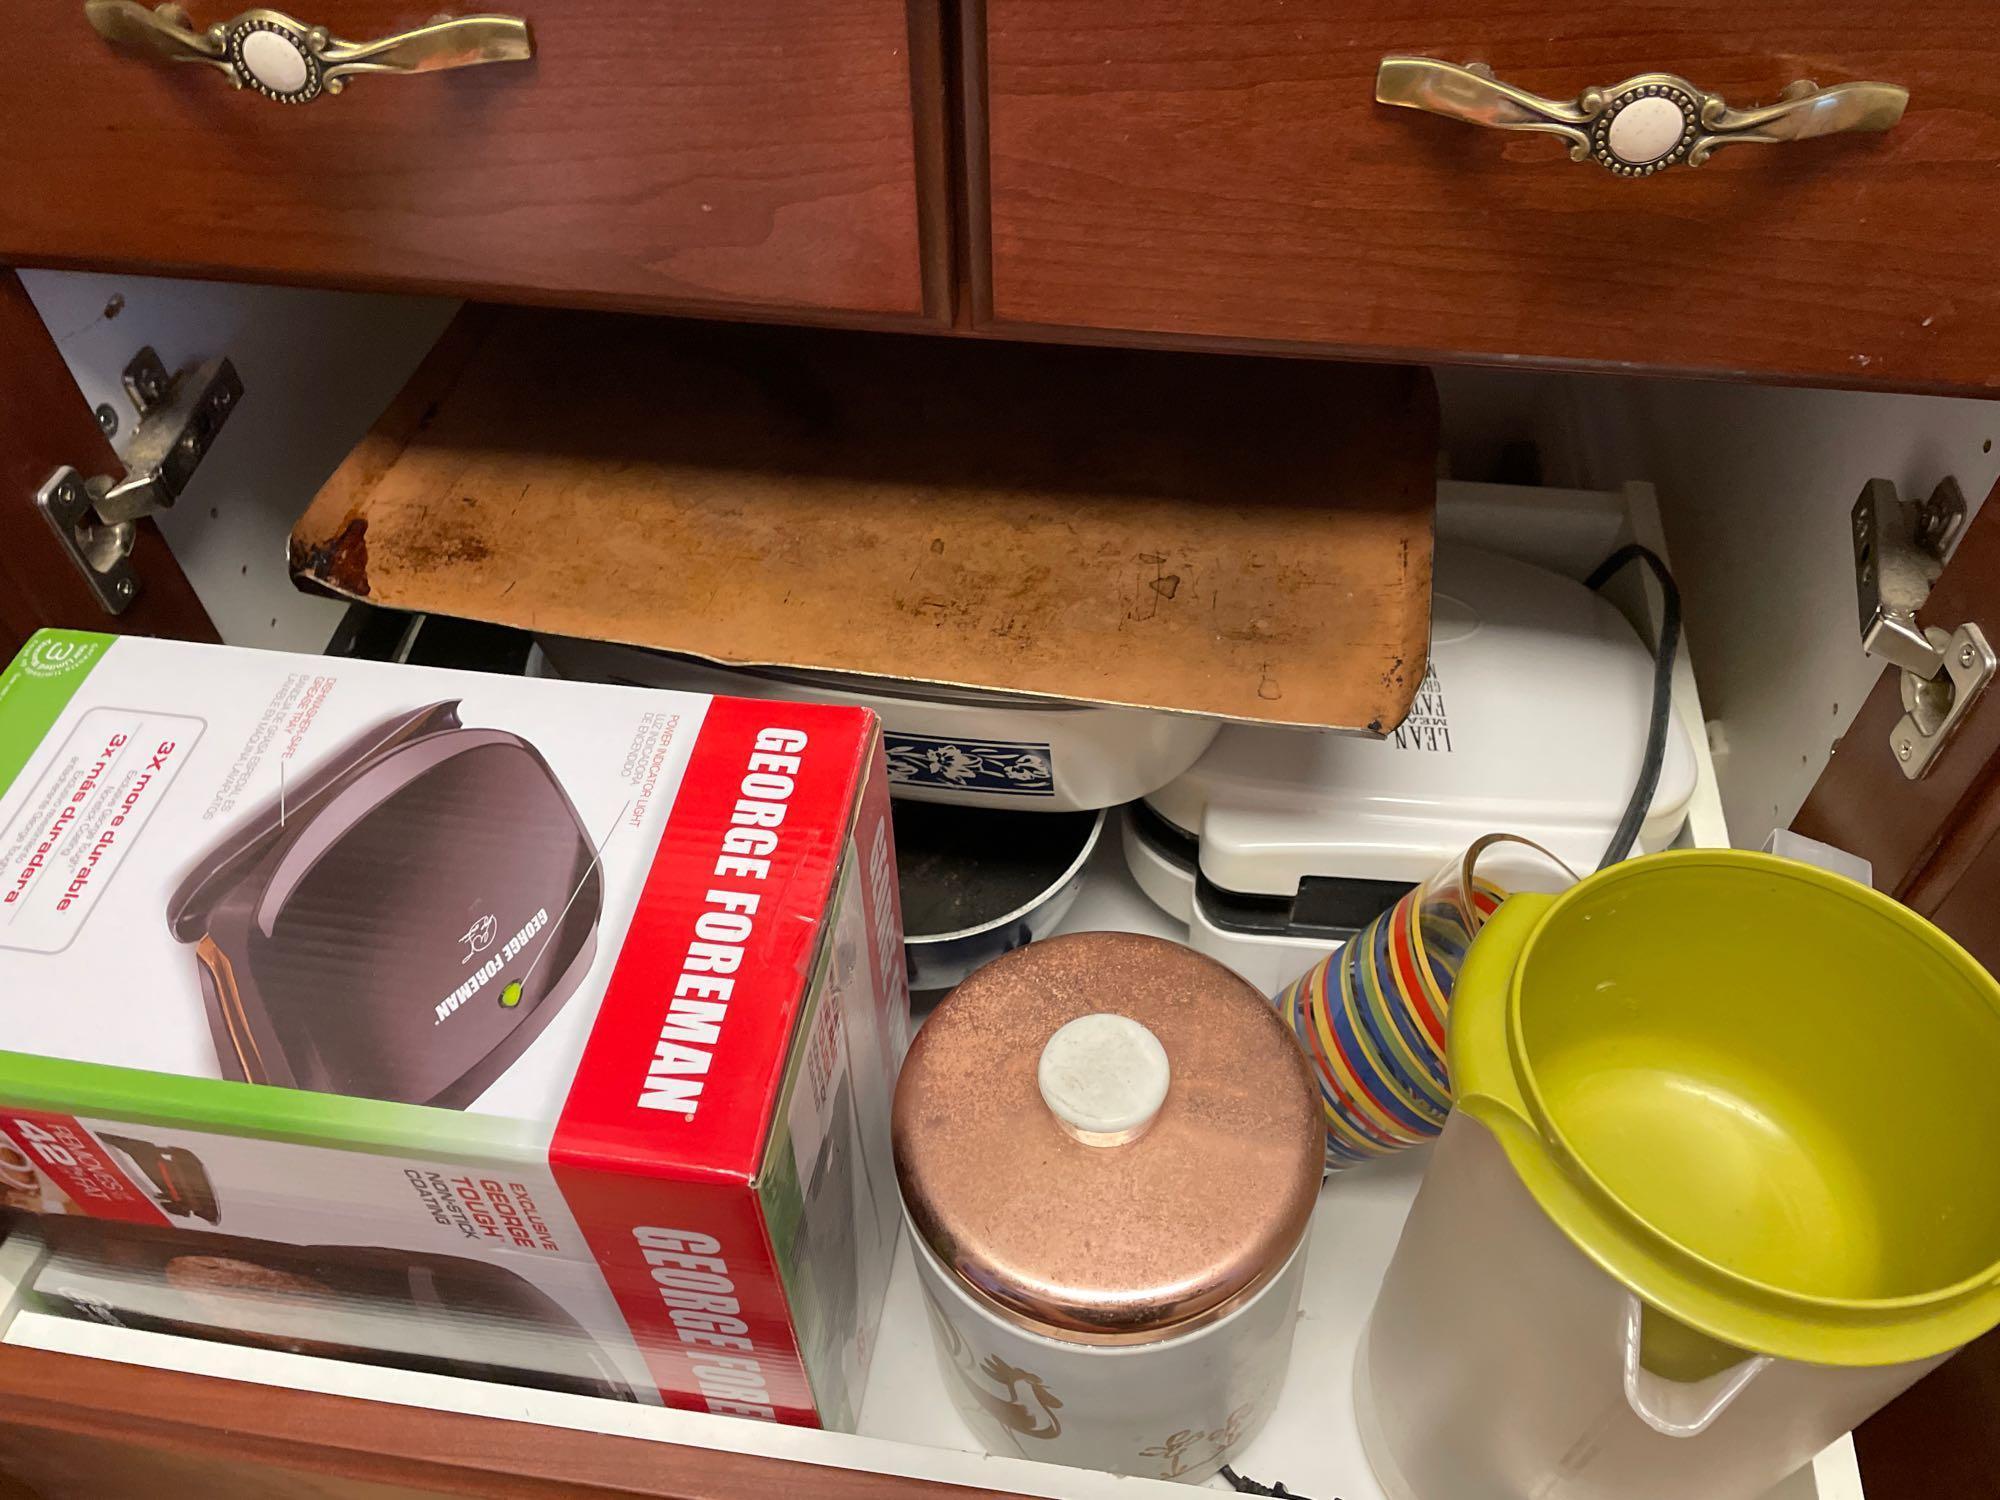 Contents of Kitchen Cabinets